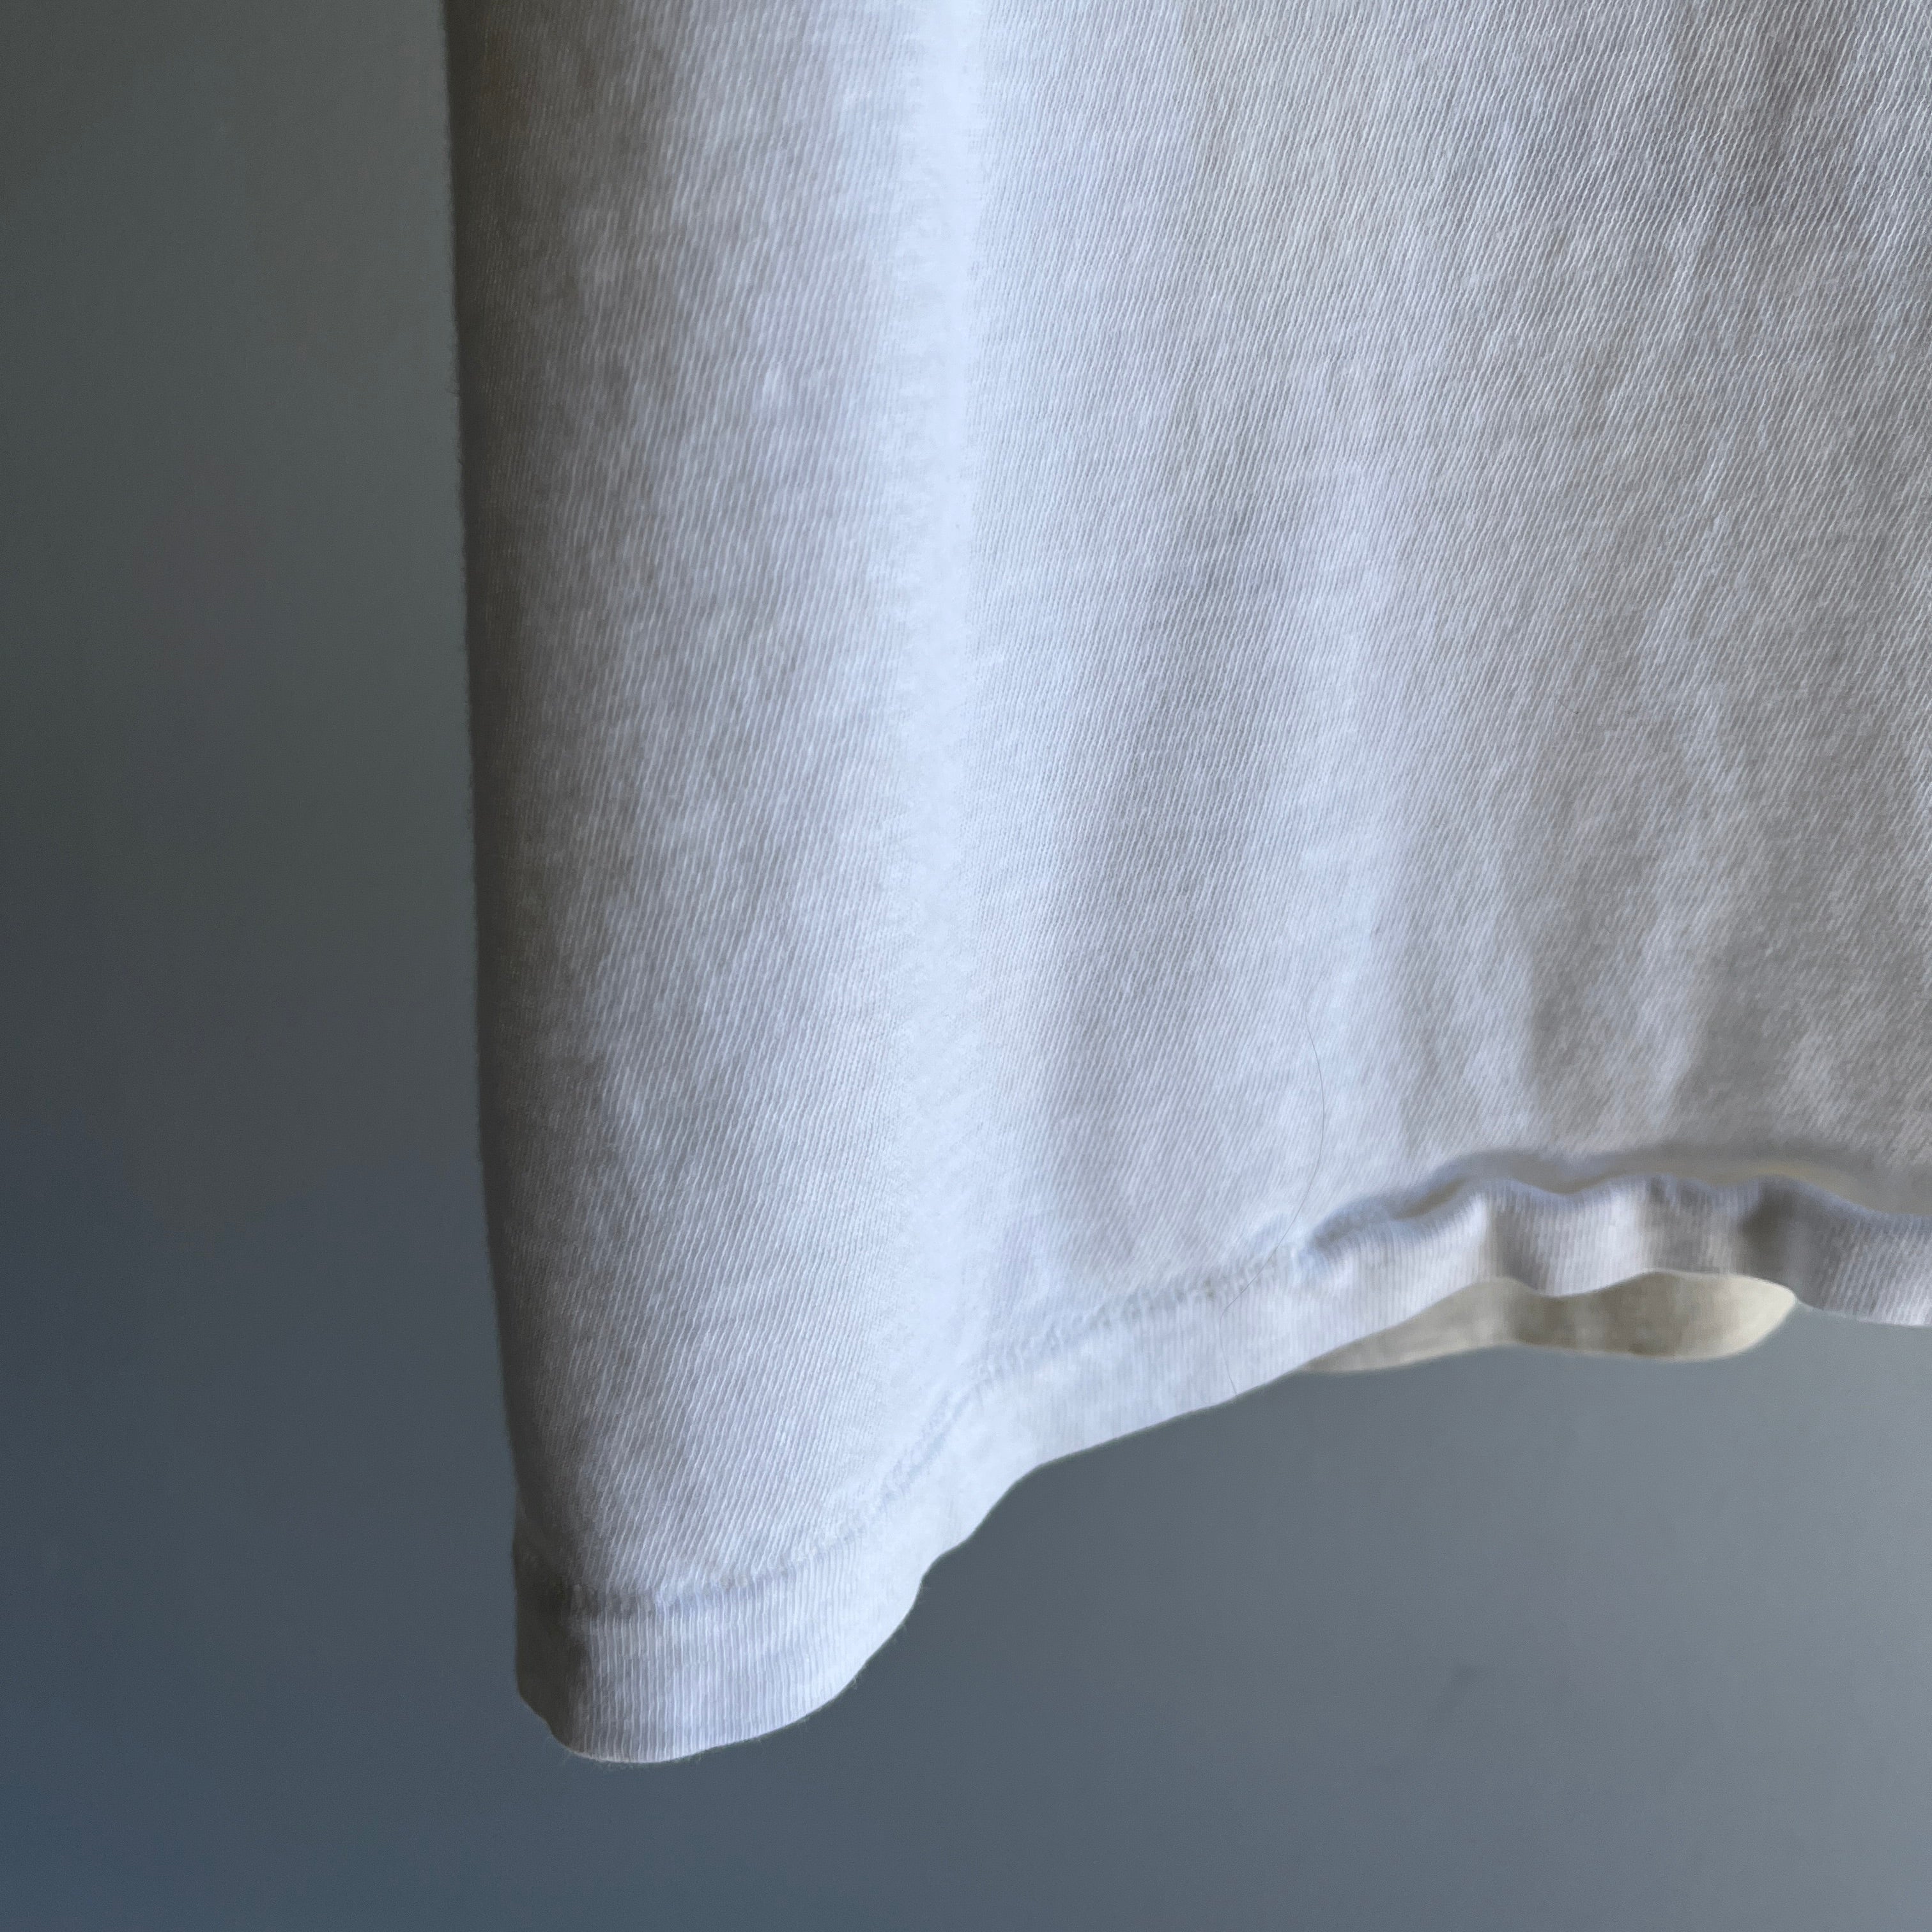 1980s Silky Soft Super Age Stained Blank Formerly White 